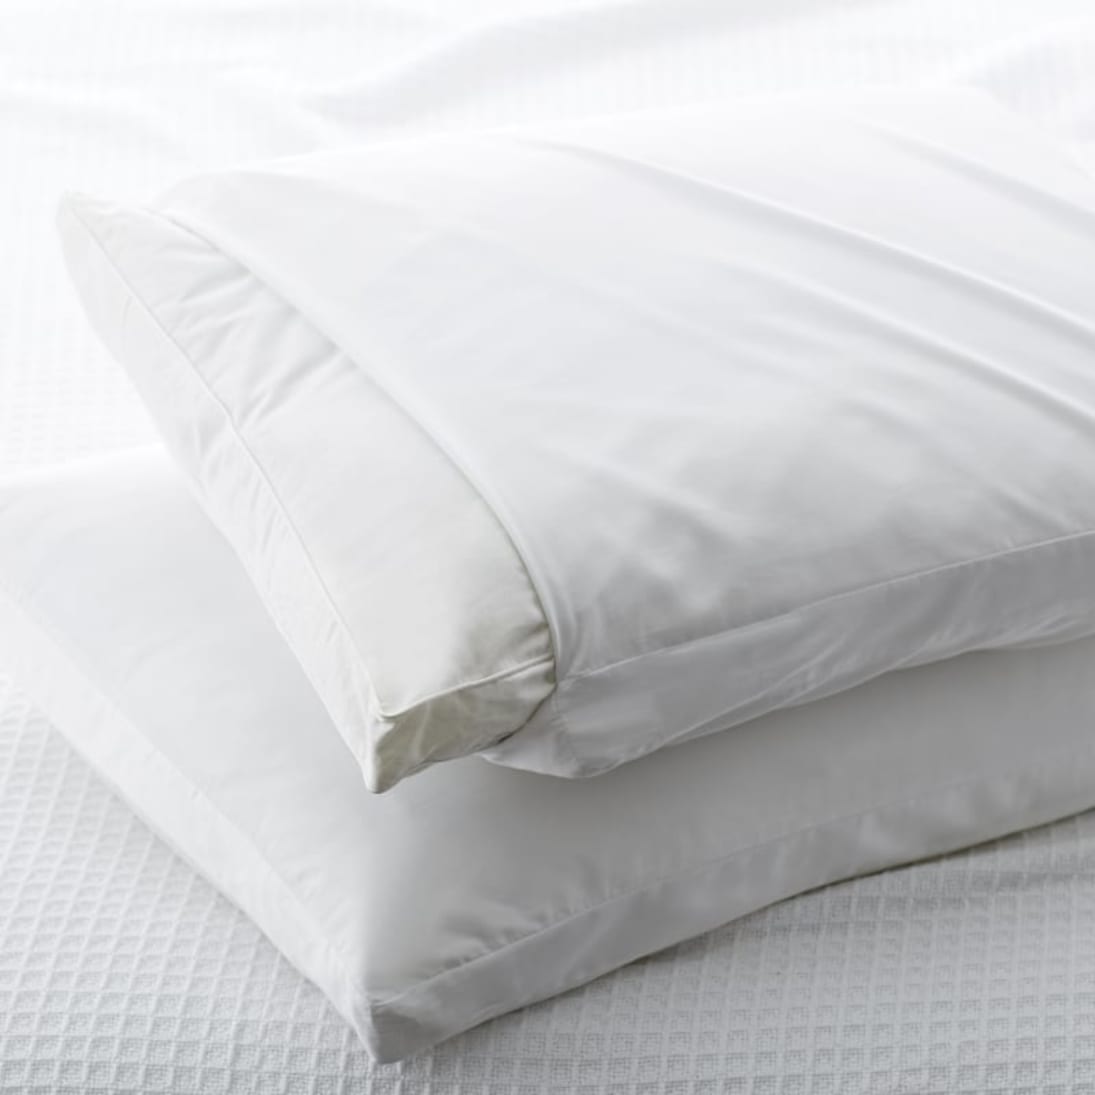 Details about   Classic Pillow Protector 300 Thread Count  White Zipper Closure 